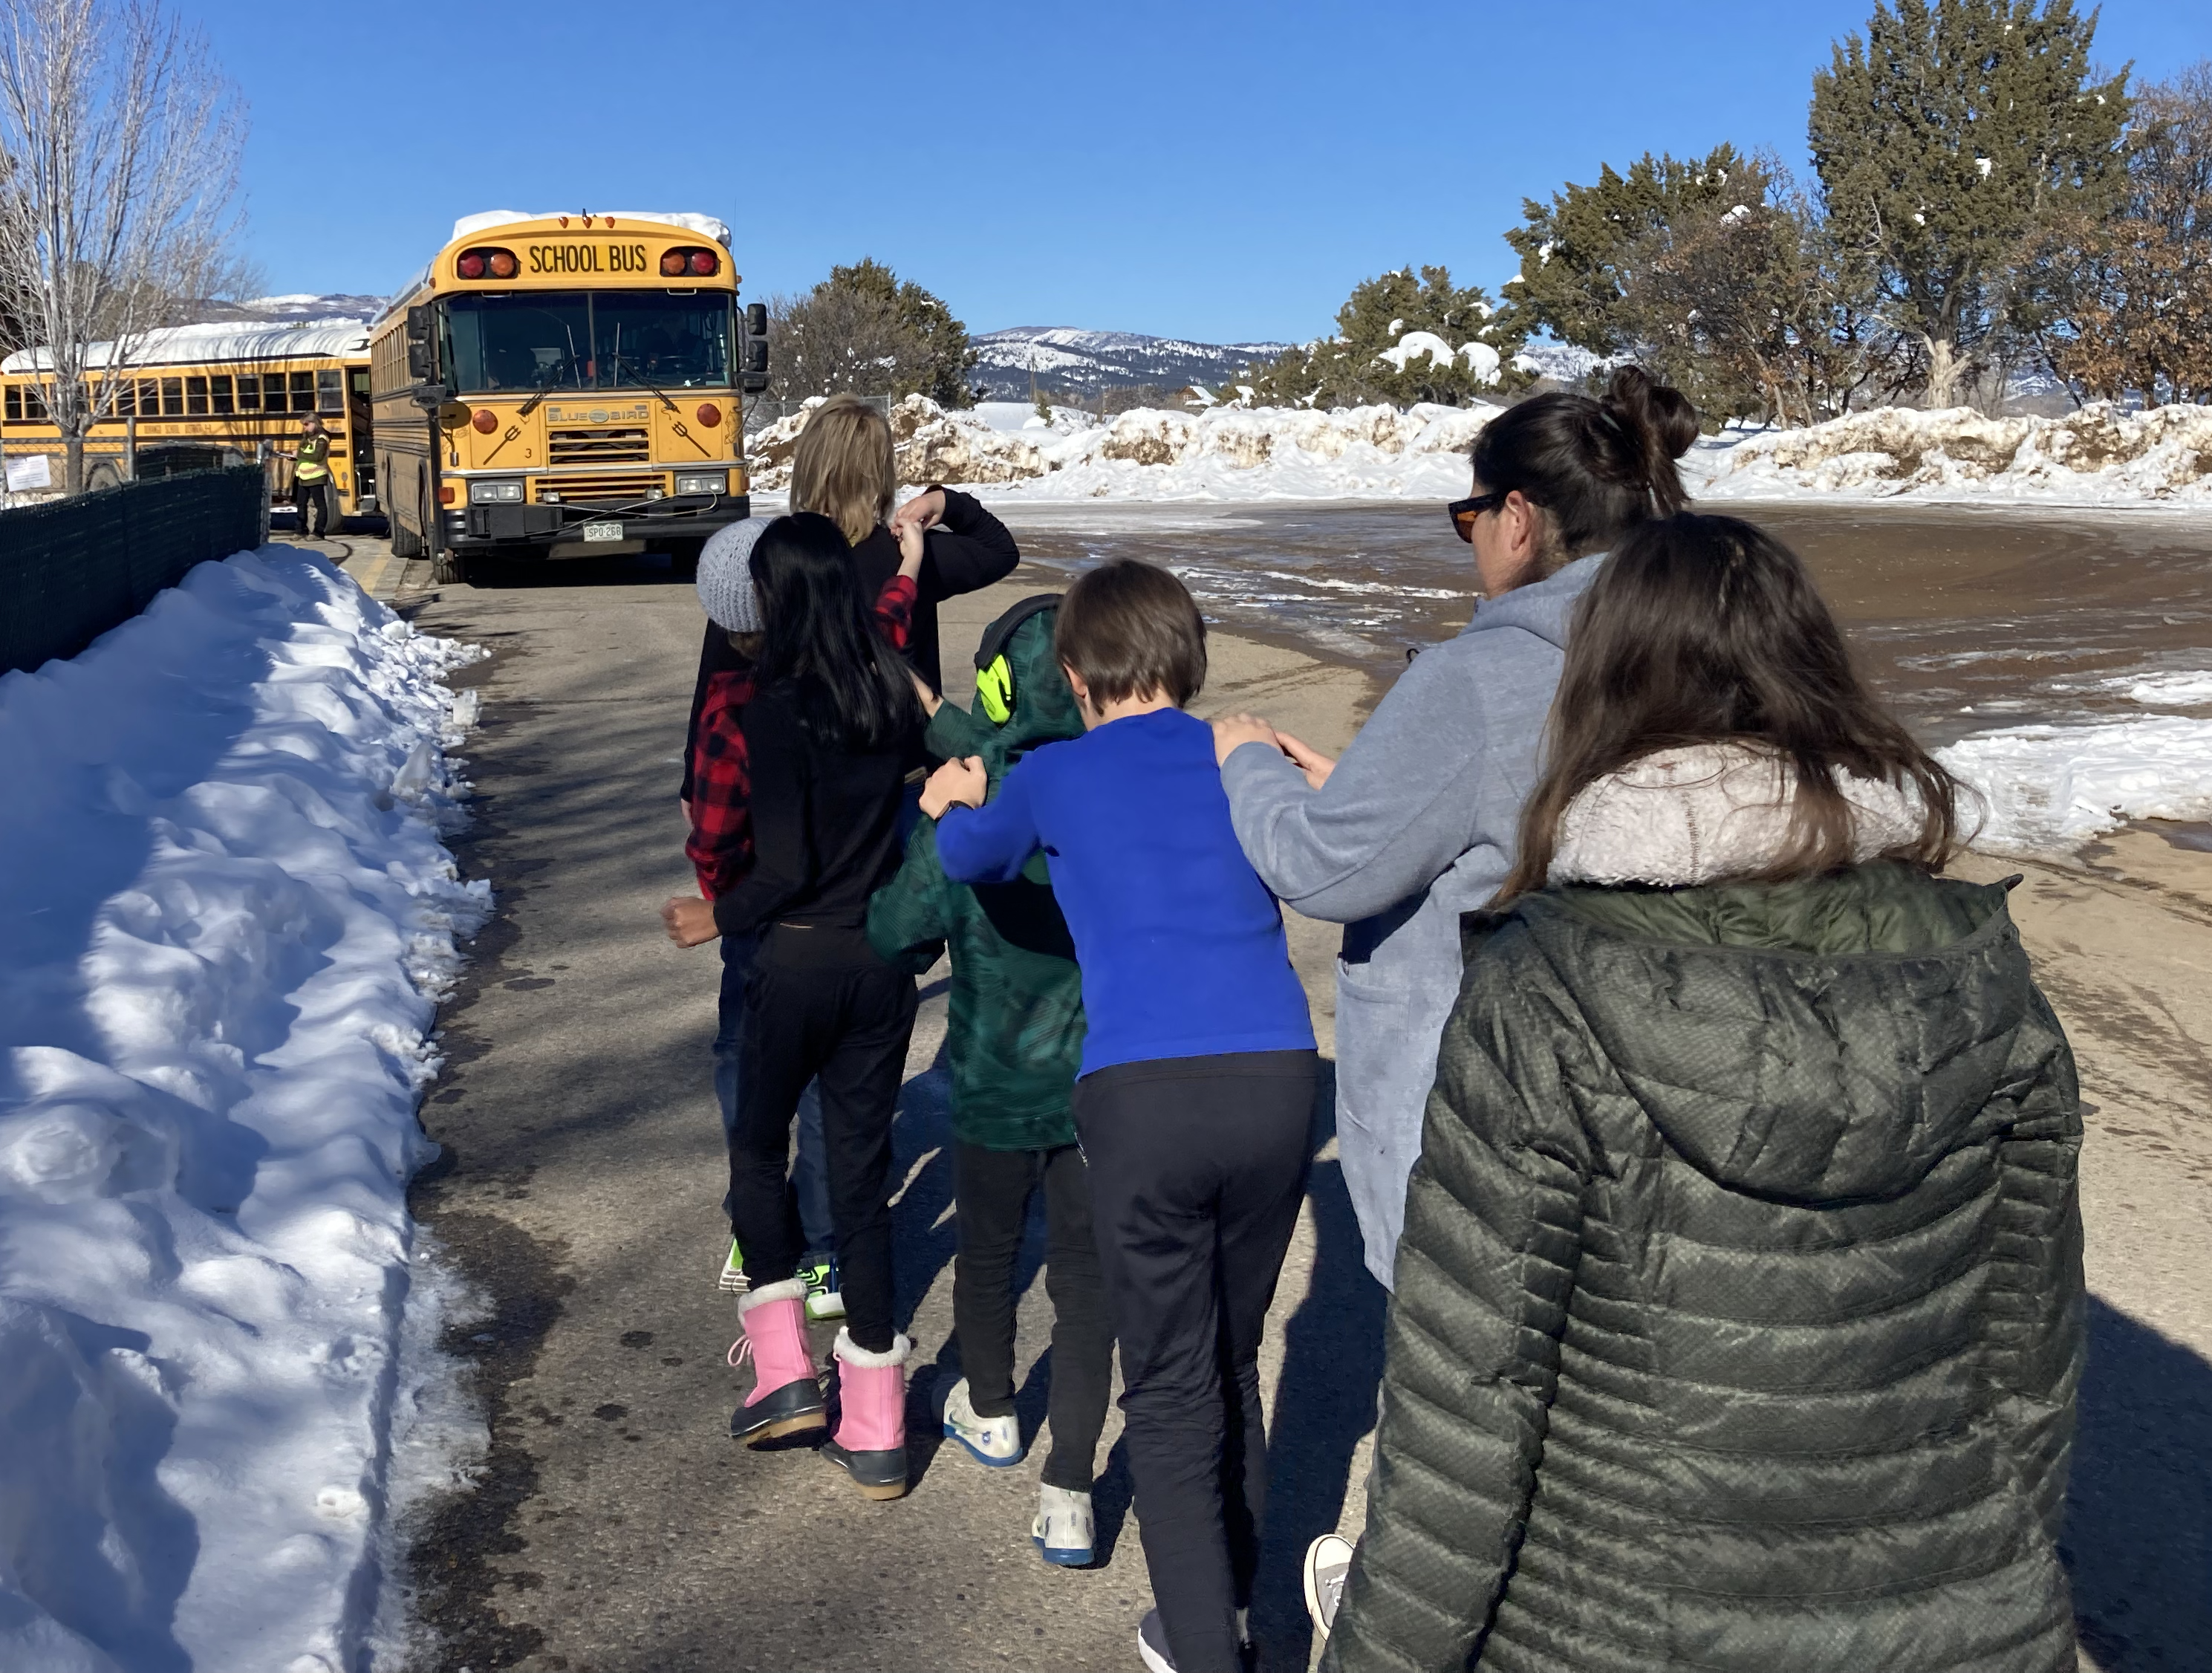 students walk in line to bus